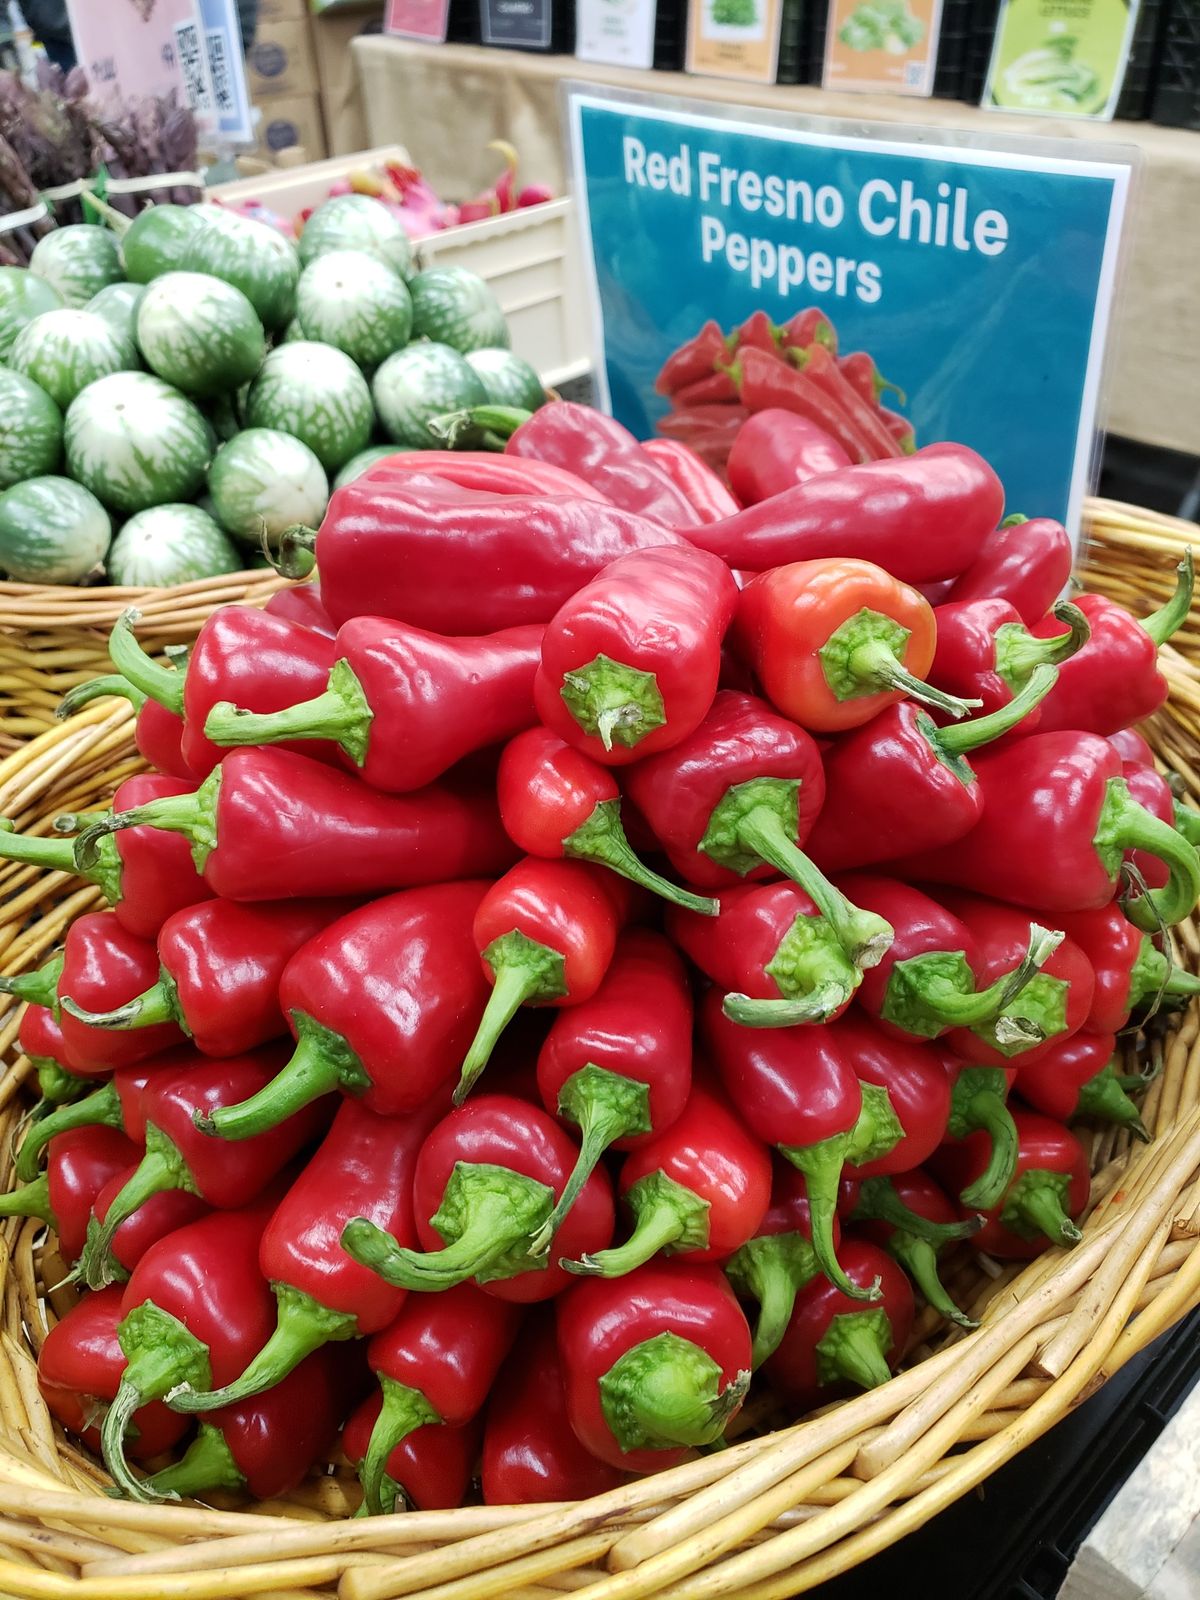 Red Fresno Chile Peppers